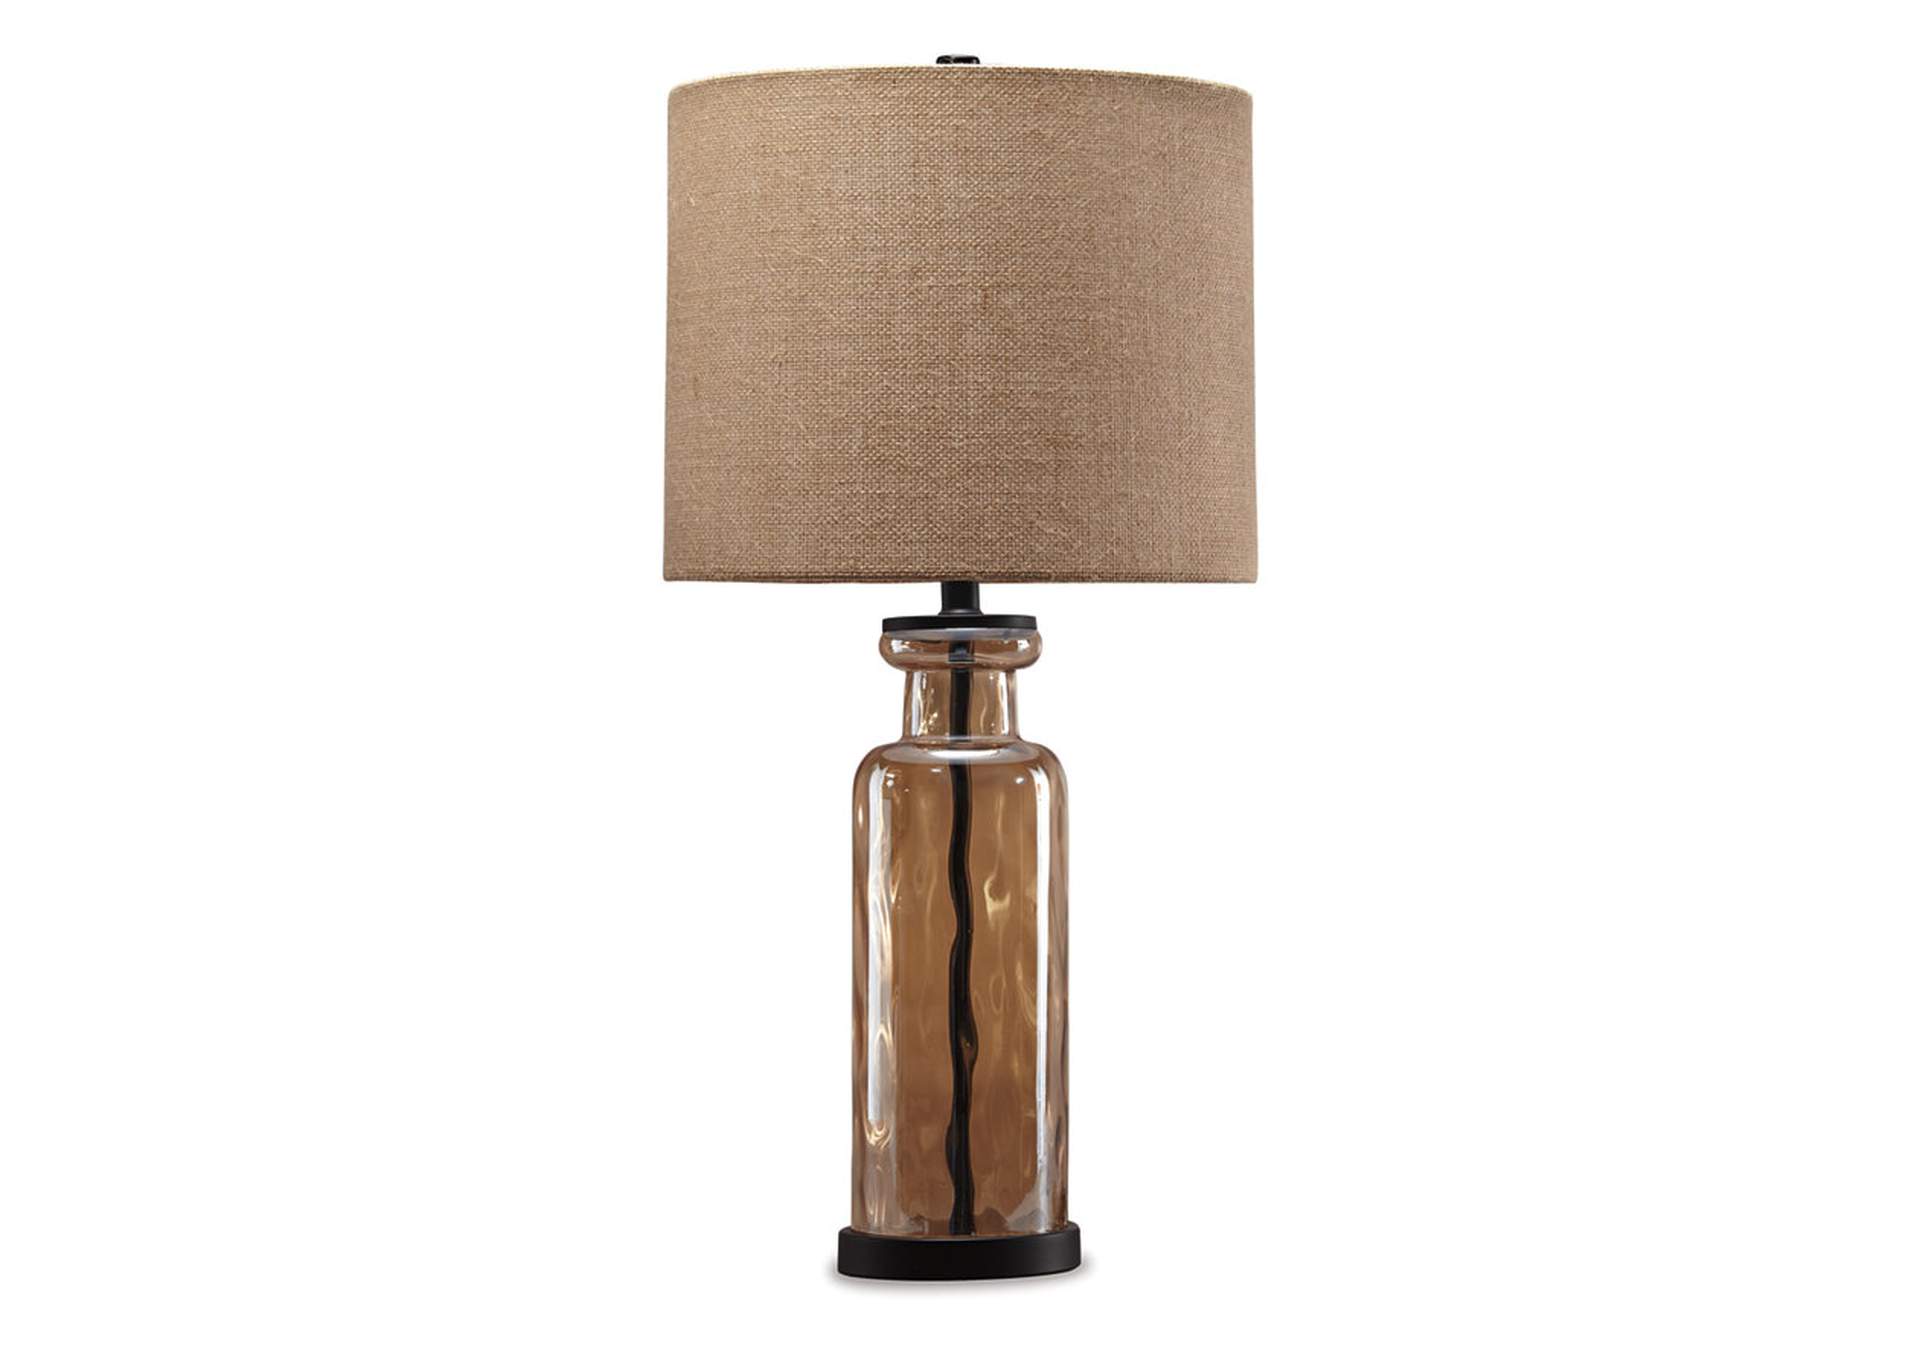 Laurentia Table Lamp,Direct To Consumer Express